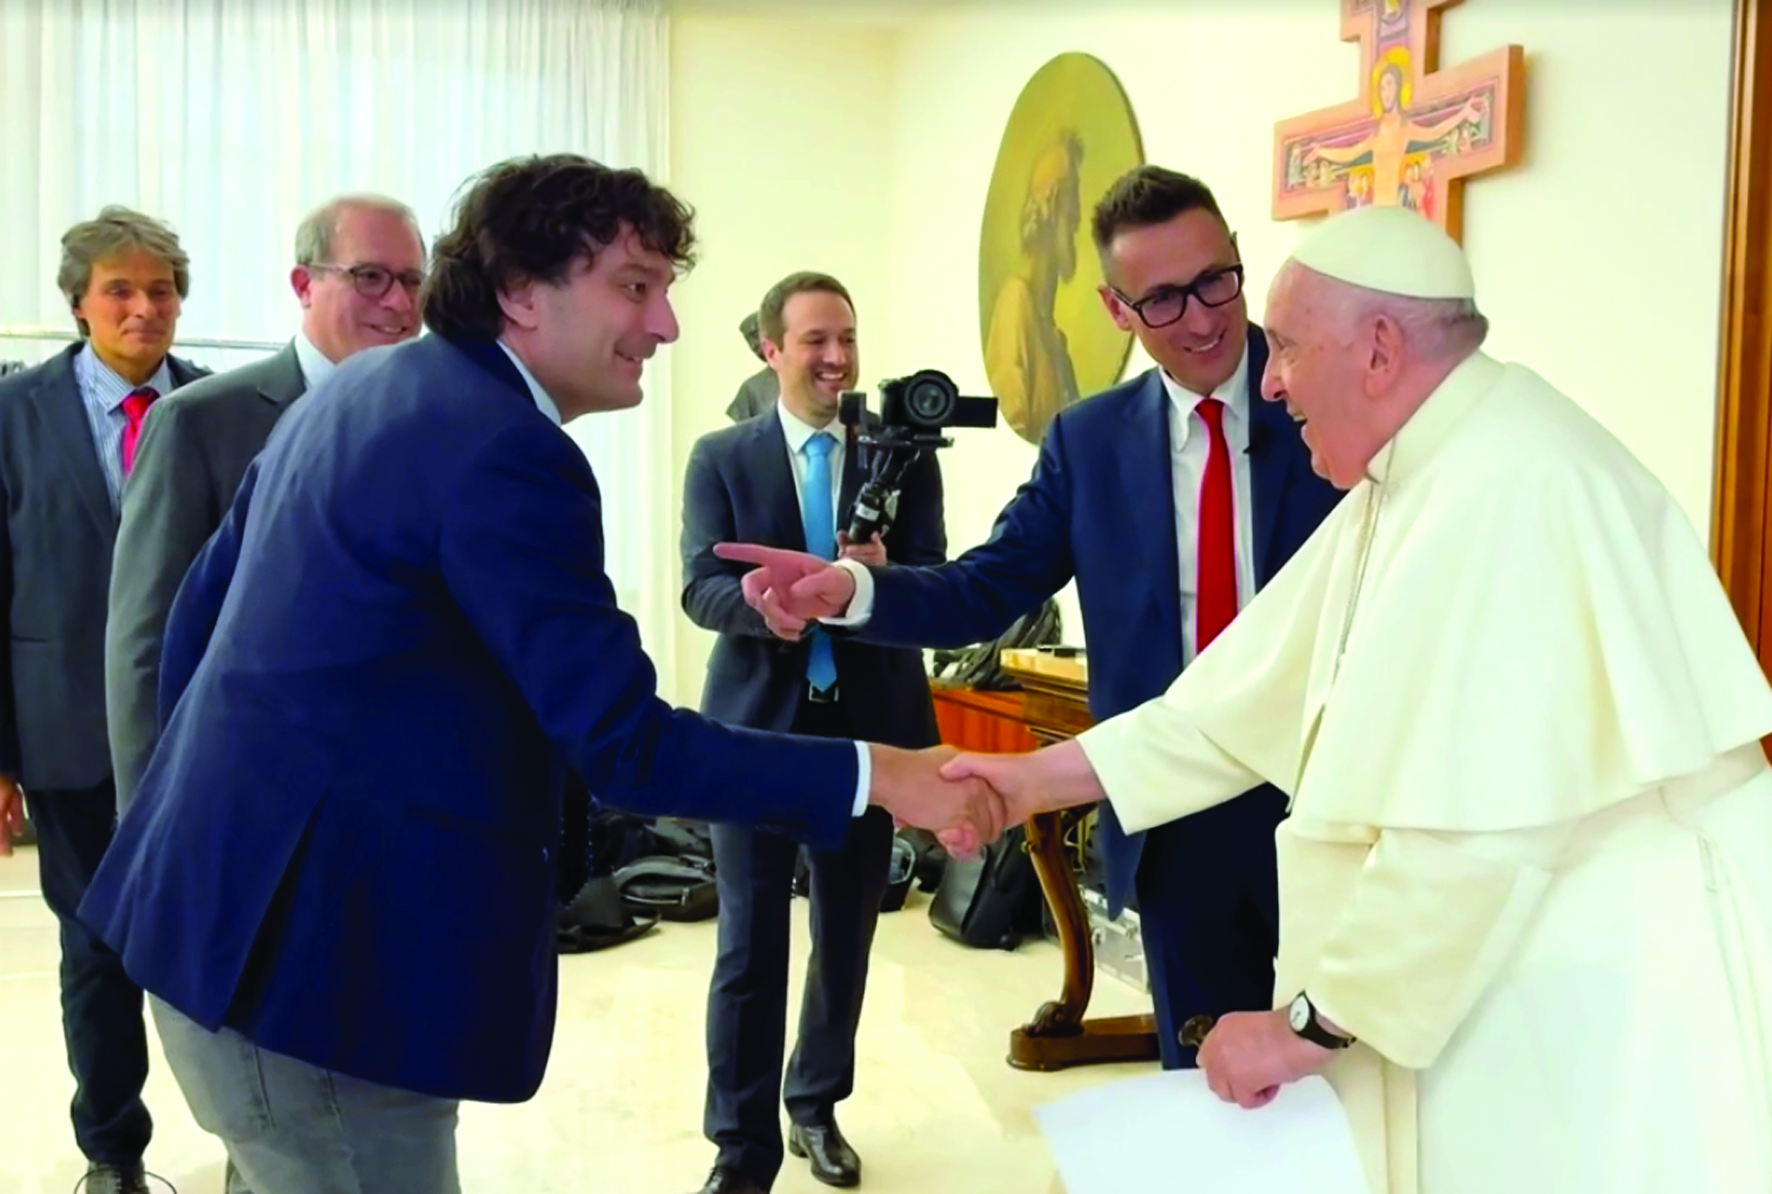 Pope Francis Celebrates 10 Years With Series of Interviews